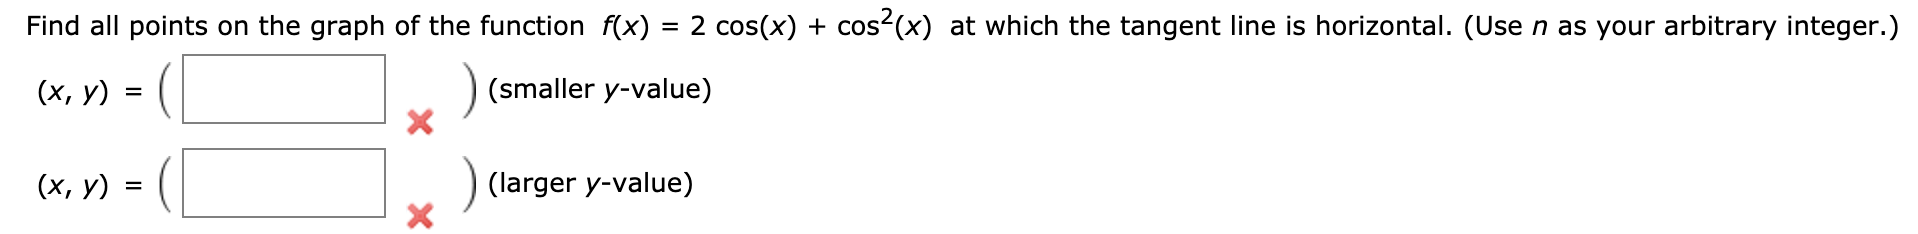 Find all points on the graph of the function f(x) = 2 cos(x) + cos (x) at which the tangent line is horizontal. (Use n as your arbitrary integer.)
(x, y)
(smaller y-value)
(х, у)
(larger y-value)
